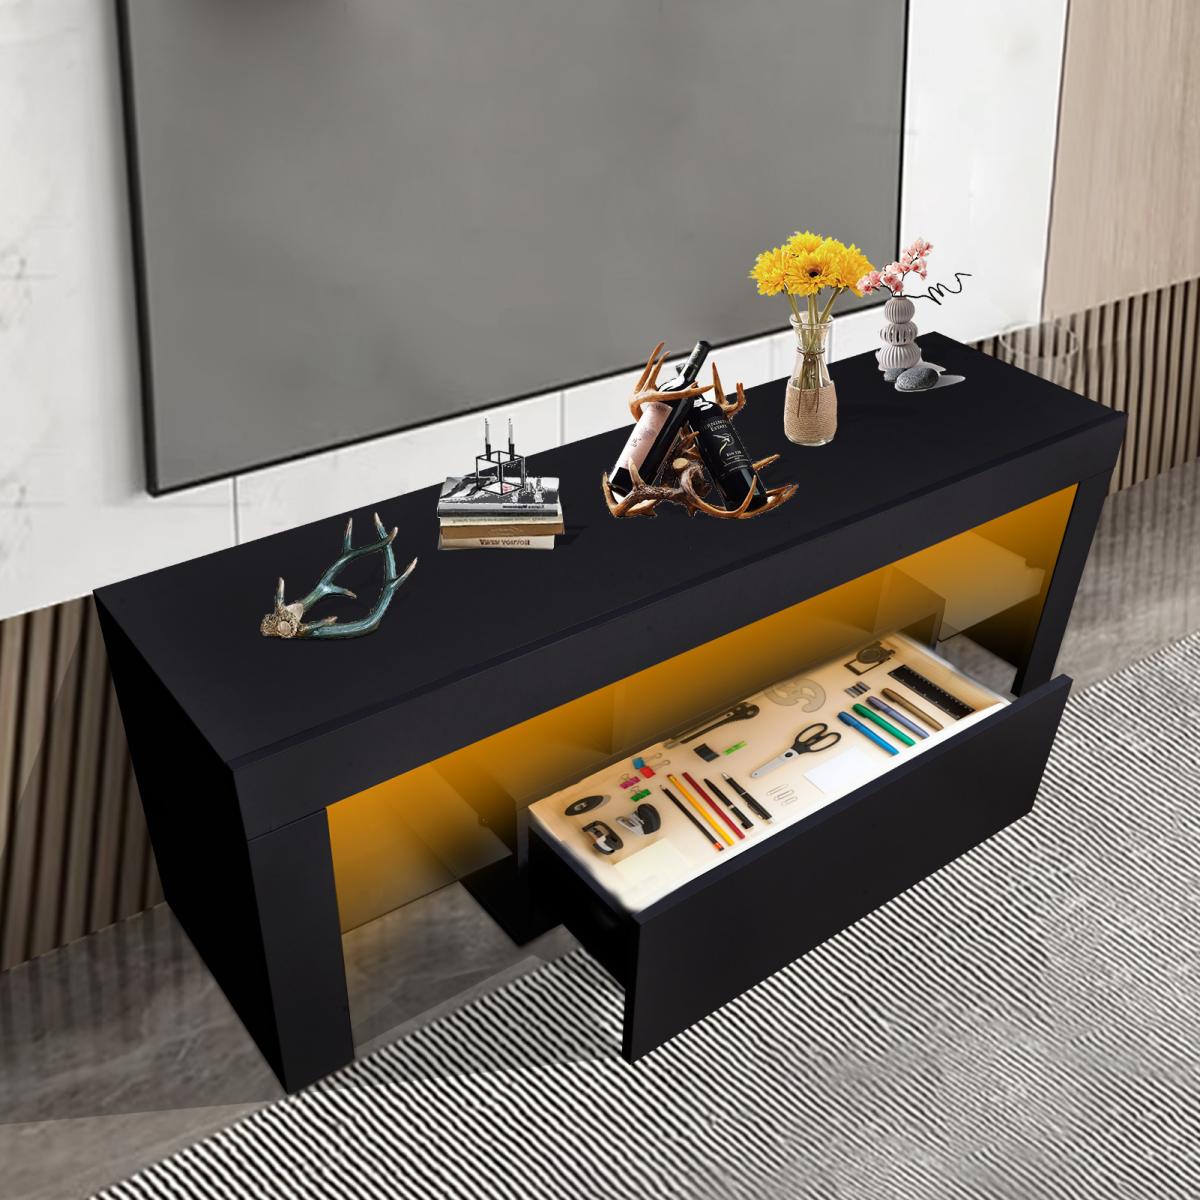 TV stand with Storage 43 inch Led Modern Tv Media Console Entertainment Center with Drawer Tv cabinet for Living Room Bedroom